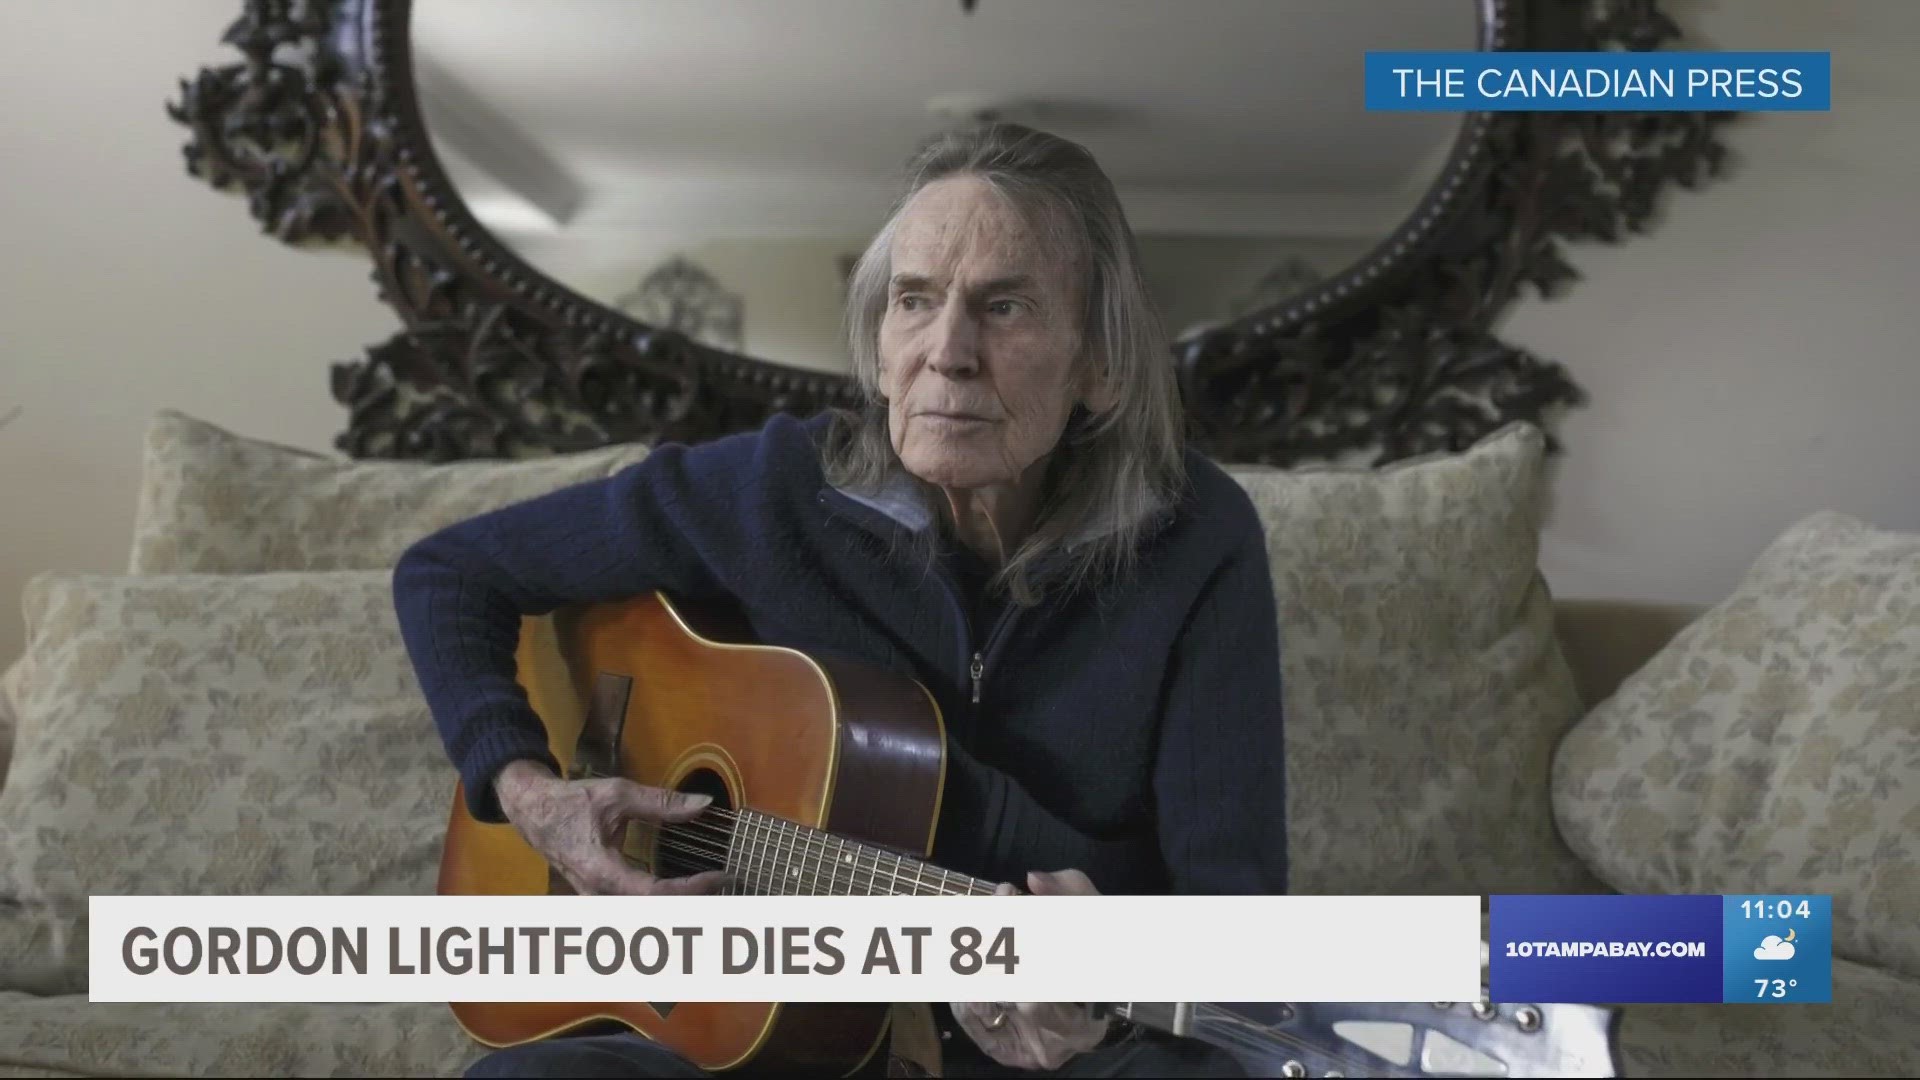 The legendary folk singer-songwriter's hits include “Early Morning Rain” and “The Wreck of the Edmund Fitzgerald."